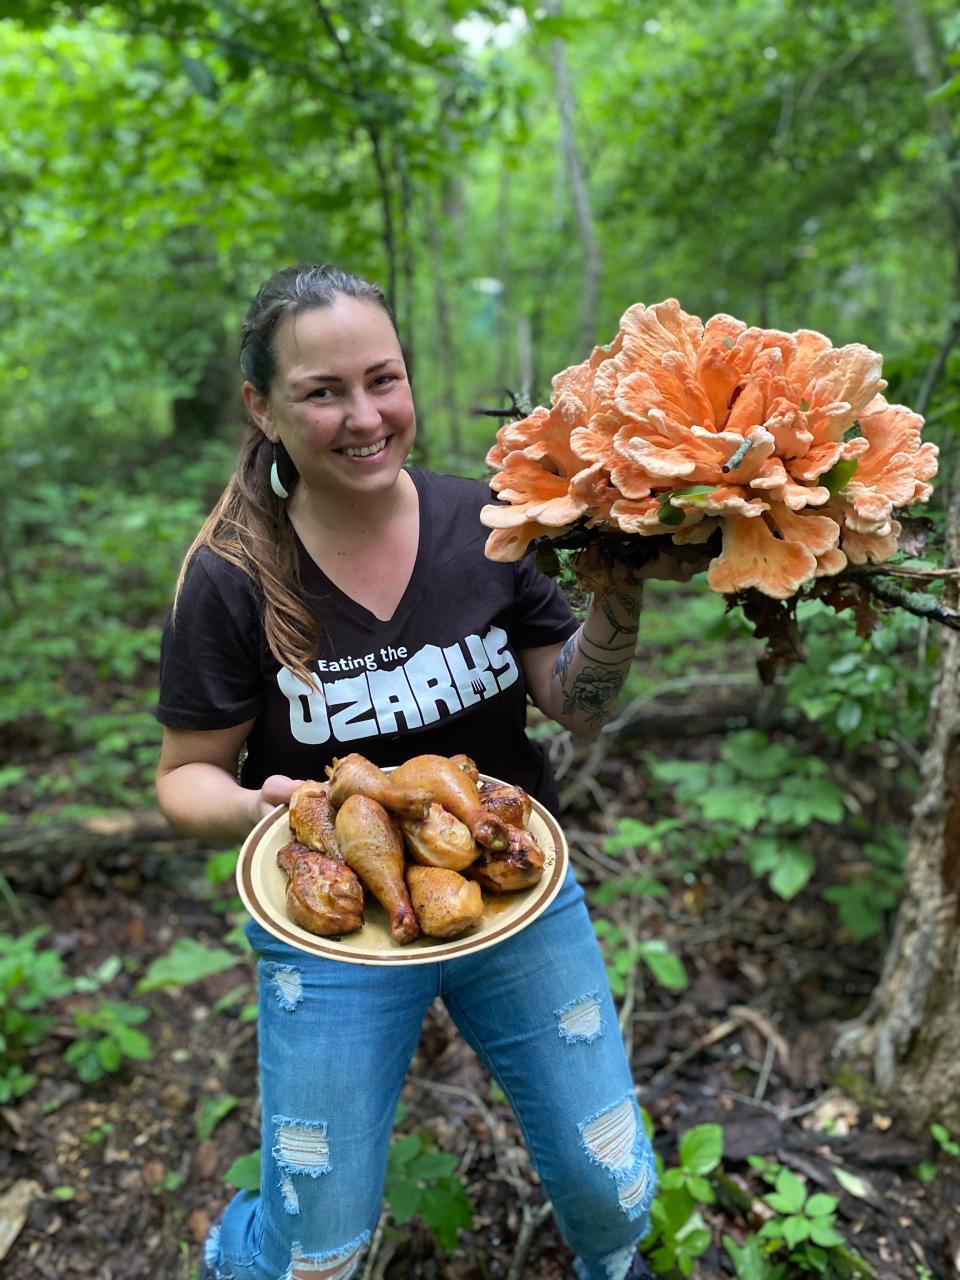 Rachael West is the owner of Eating the Ozarks, which offers an array of wild foraging and food courses.